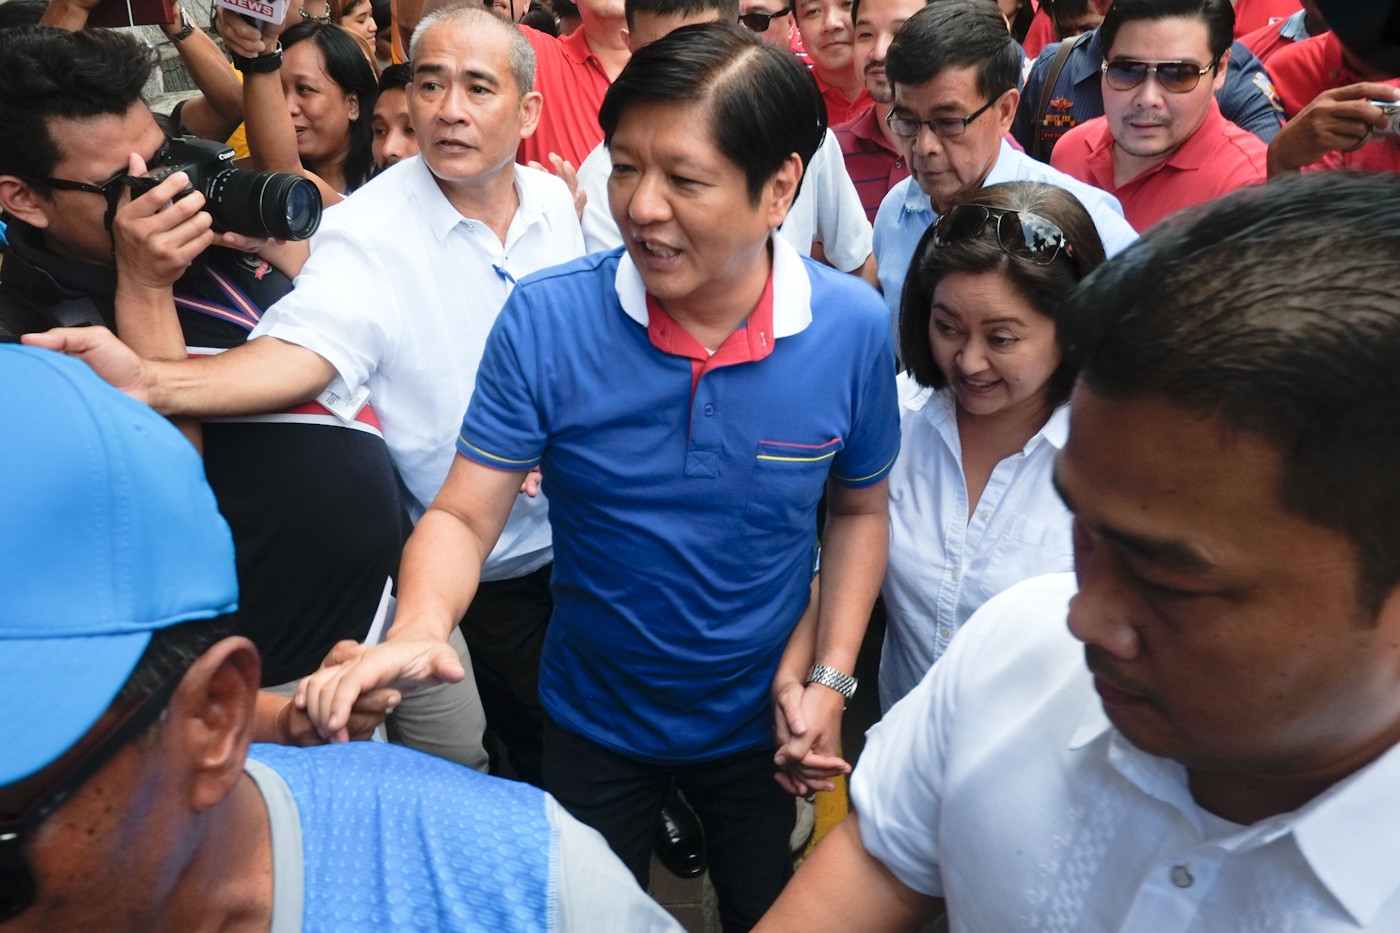 THE STRONGMAN'S JUNIOR. Senator Bongbong Marcos makes his way through the crowd as he is set to file his COC for Vice President on October 13, 2015. Photo by George Moya/Rappler   